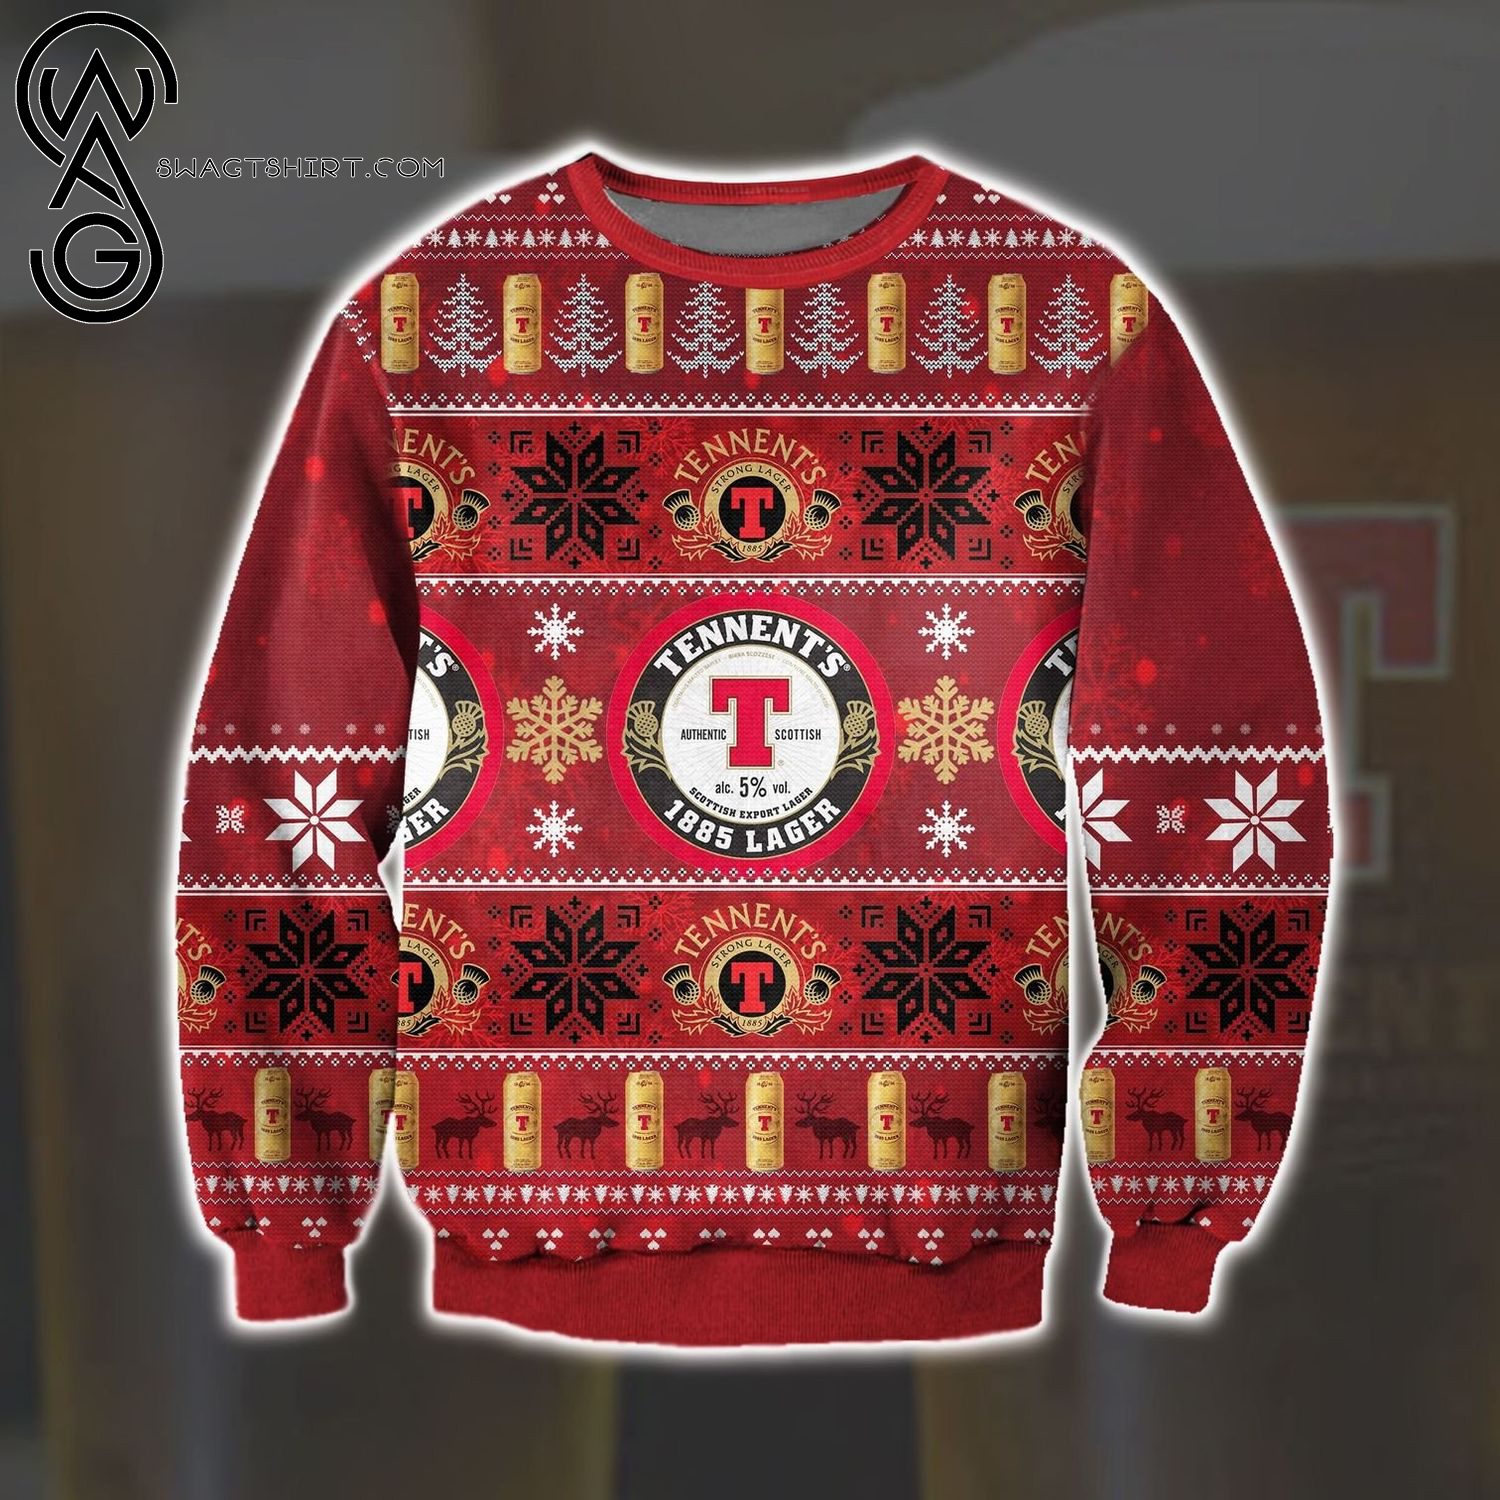 Tennent's 1885 Lager Beer Ugly Christmas Sweater